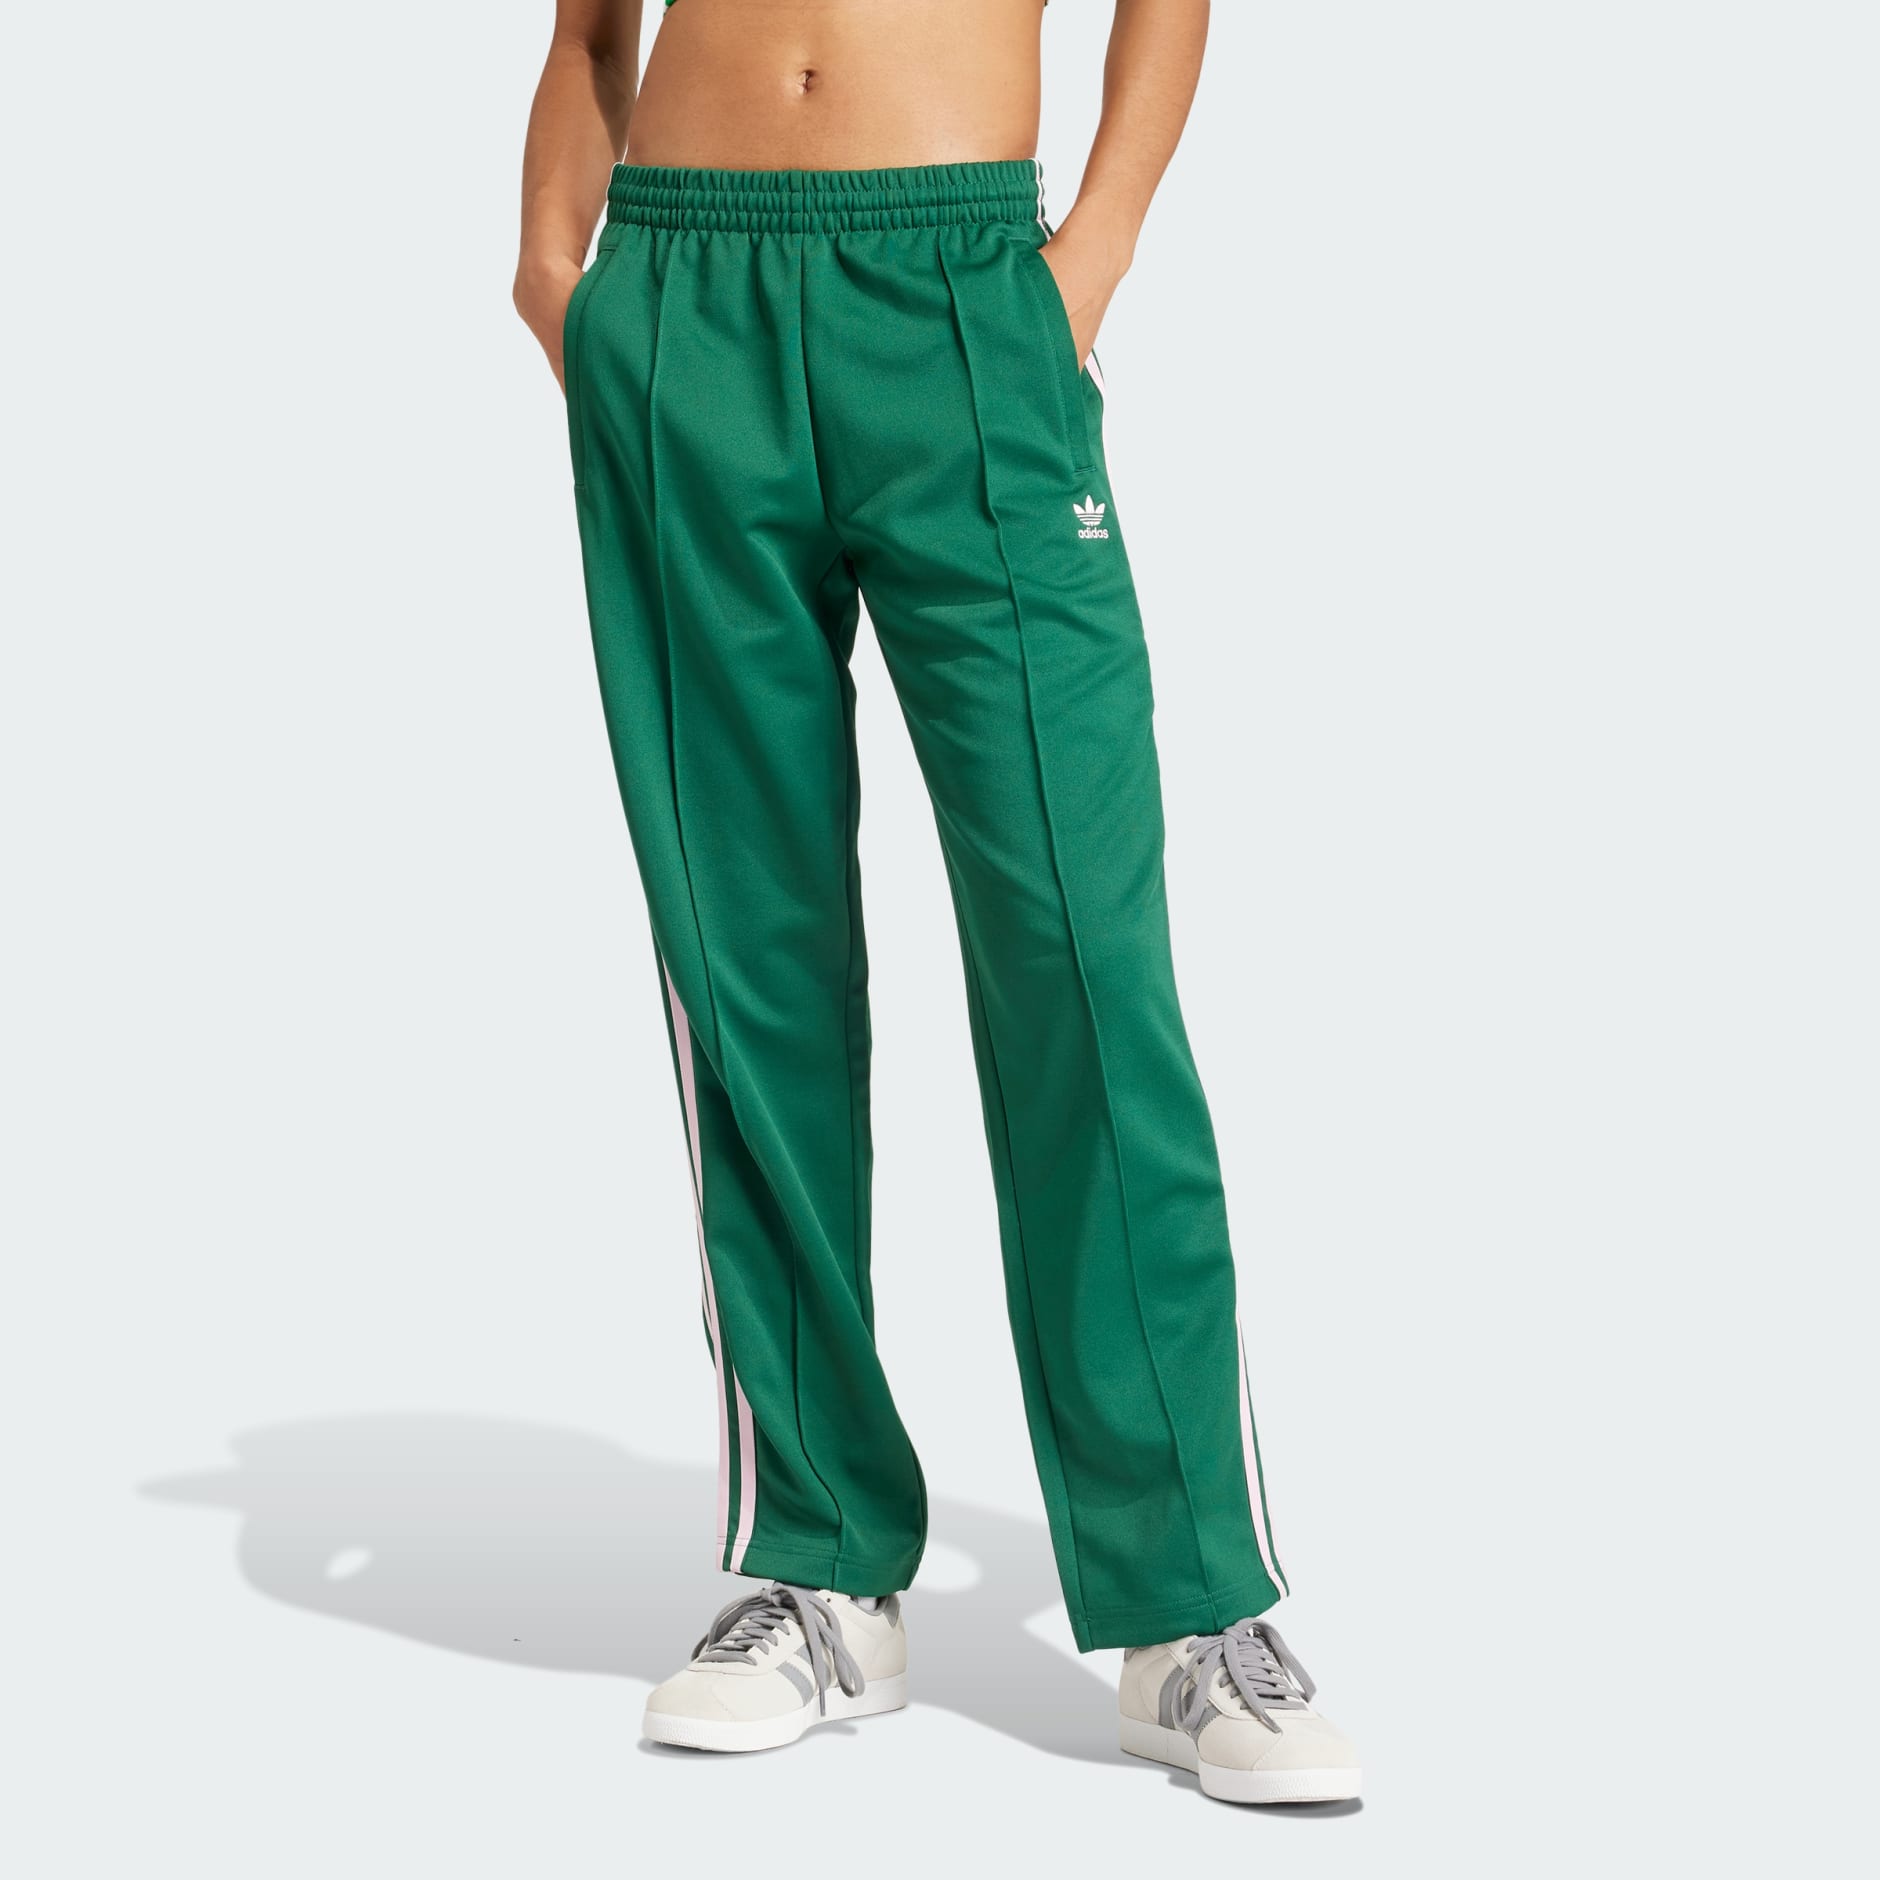 Adidas Originals Women's Track Pants - Womens Clothing from